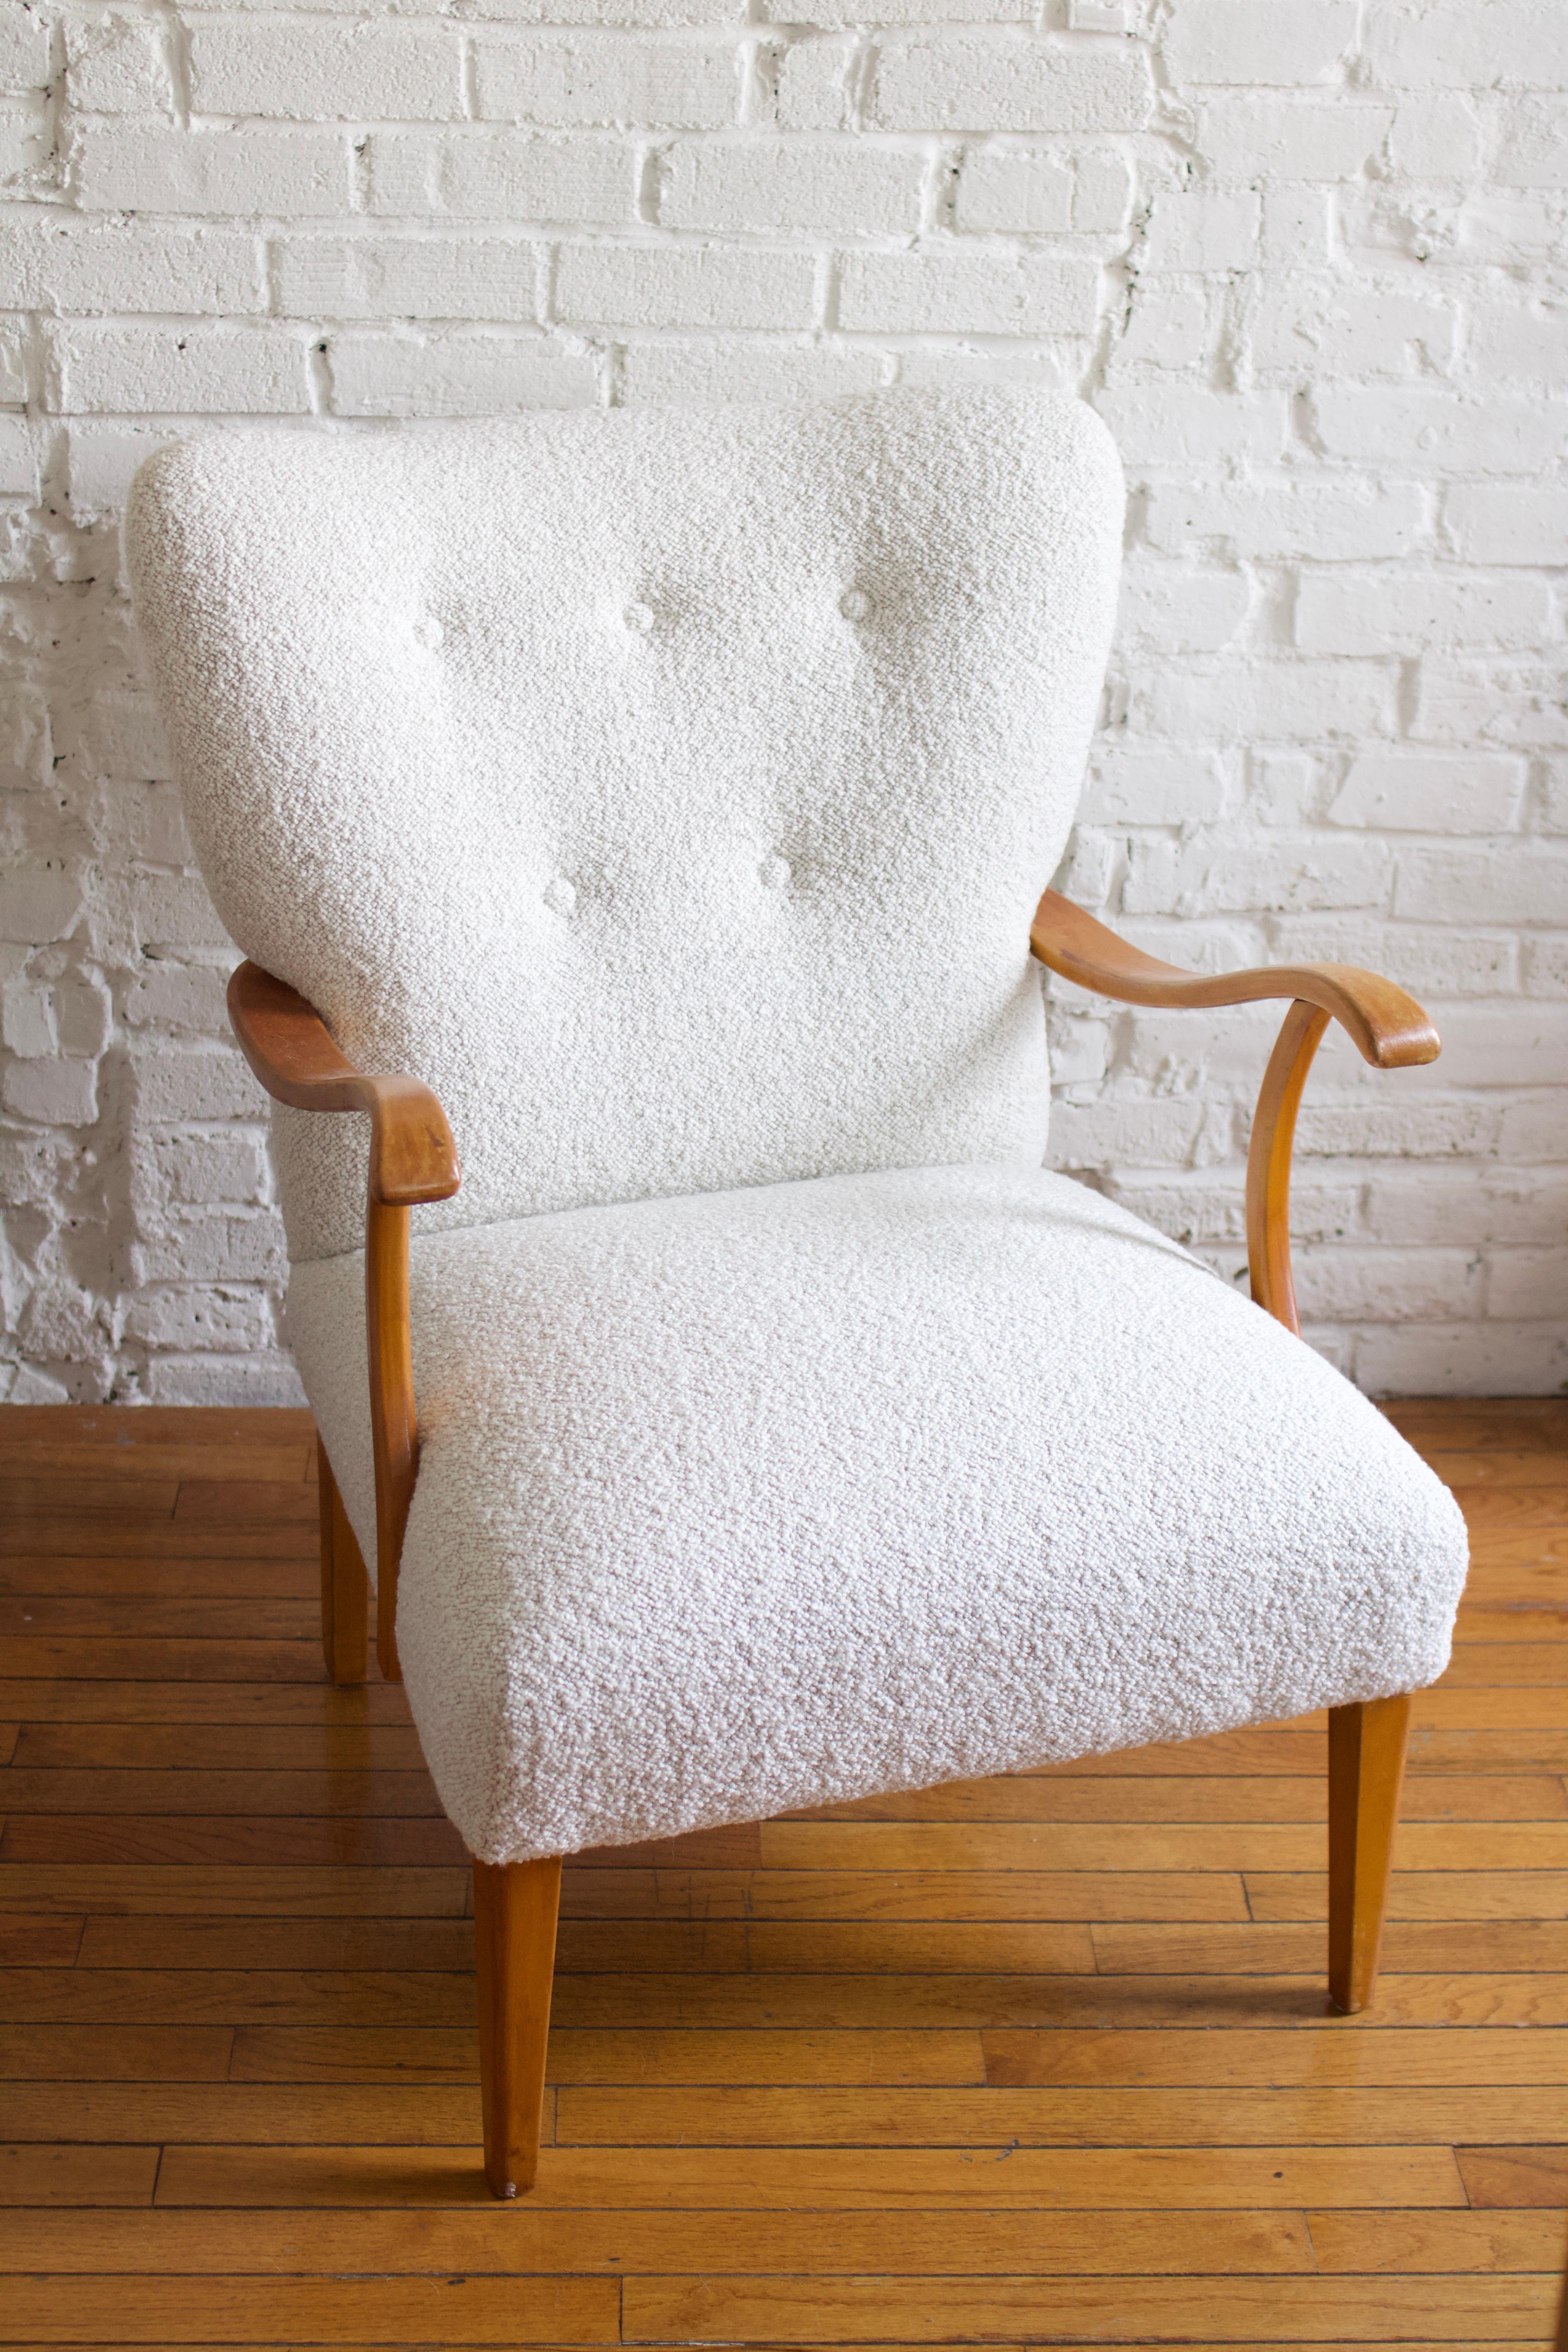 Fabulous 1950's dutch armchair attributed to Abraham A. Patijn, made in the Netherlands. This chair is in solid condition and was recently reupholstered in a nubby woven white fabric. The chair has an impressive beechwood frame with sculptural arms,